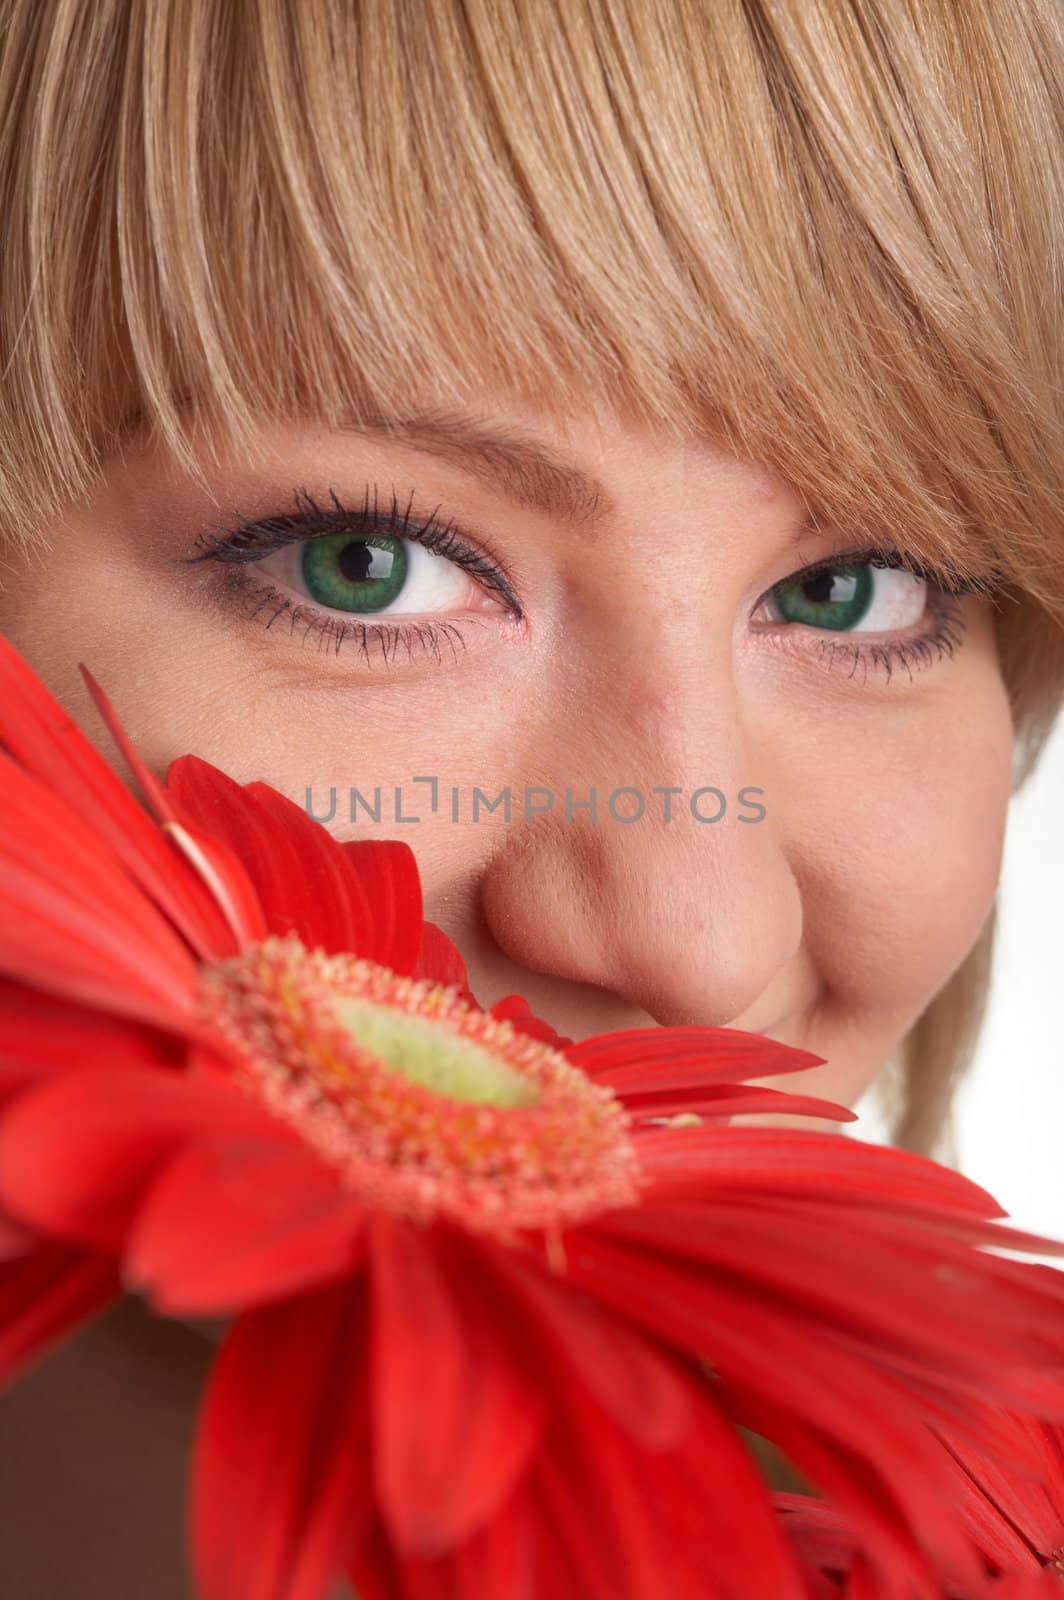 An image of nice girl with red flowers